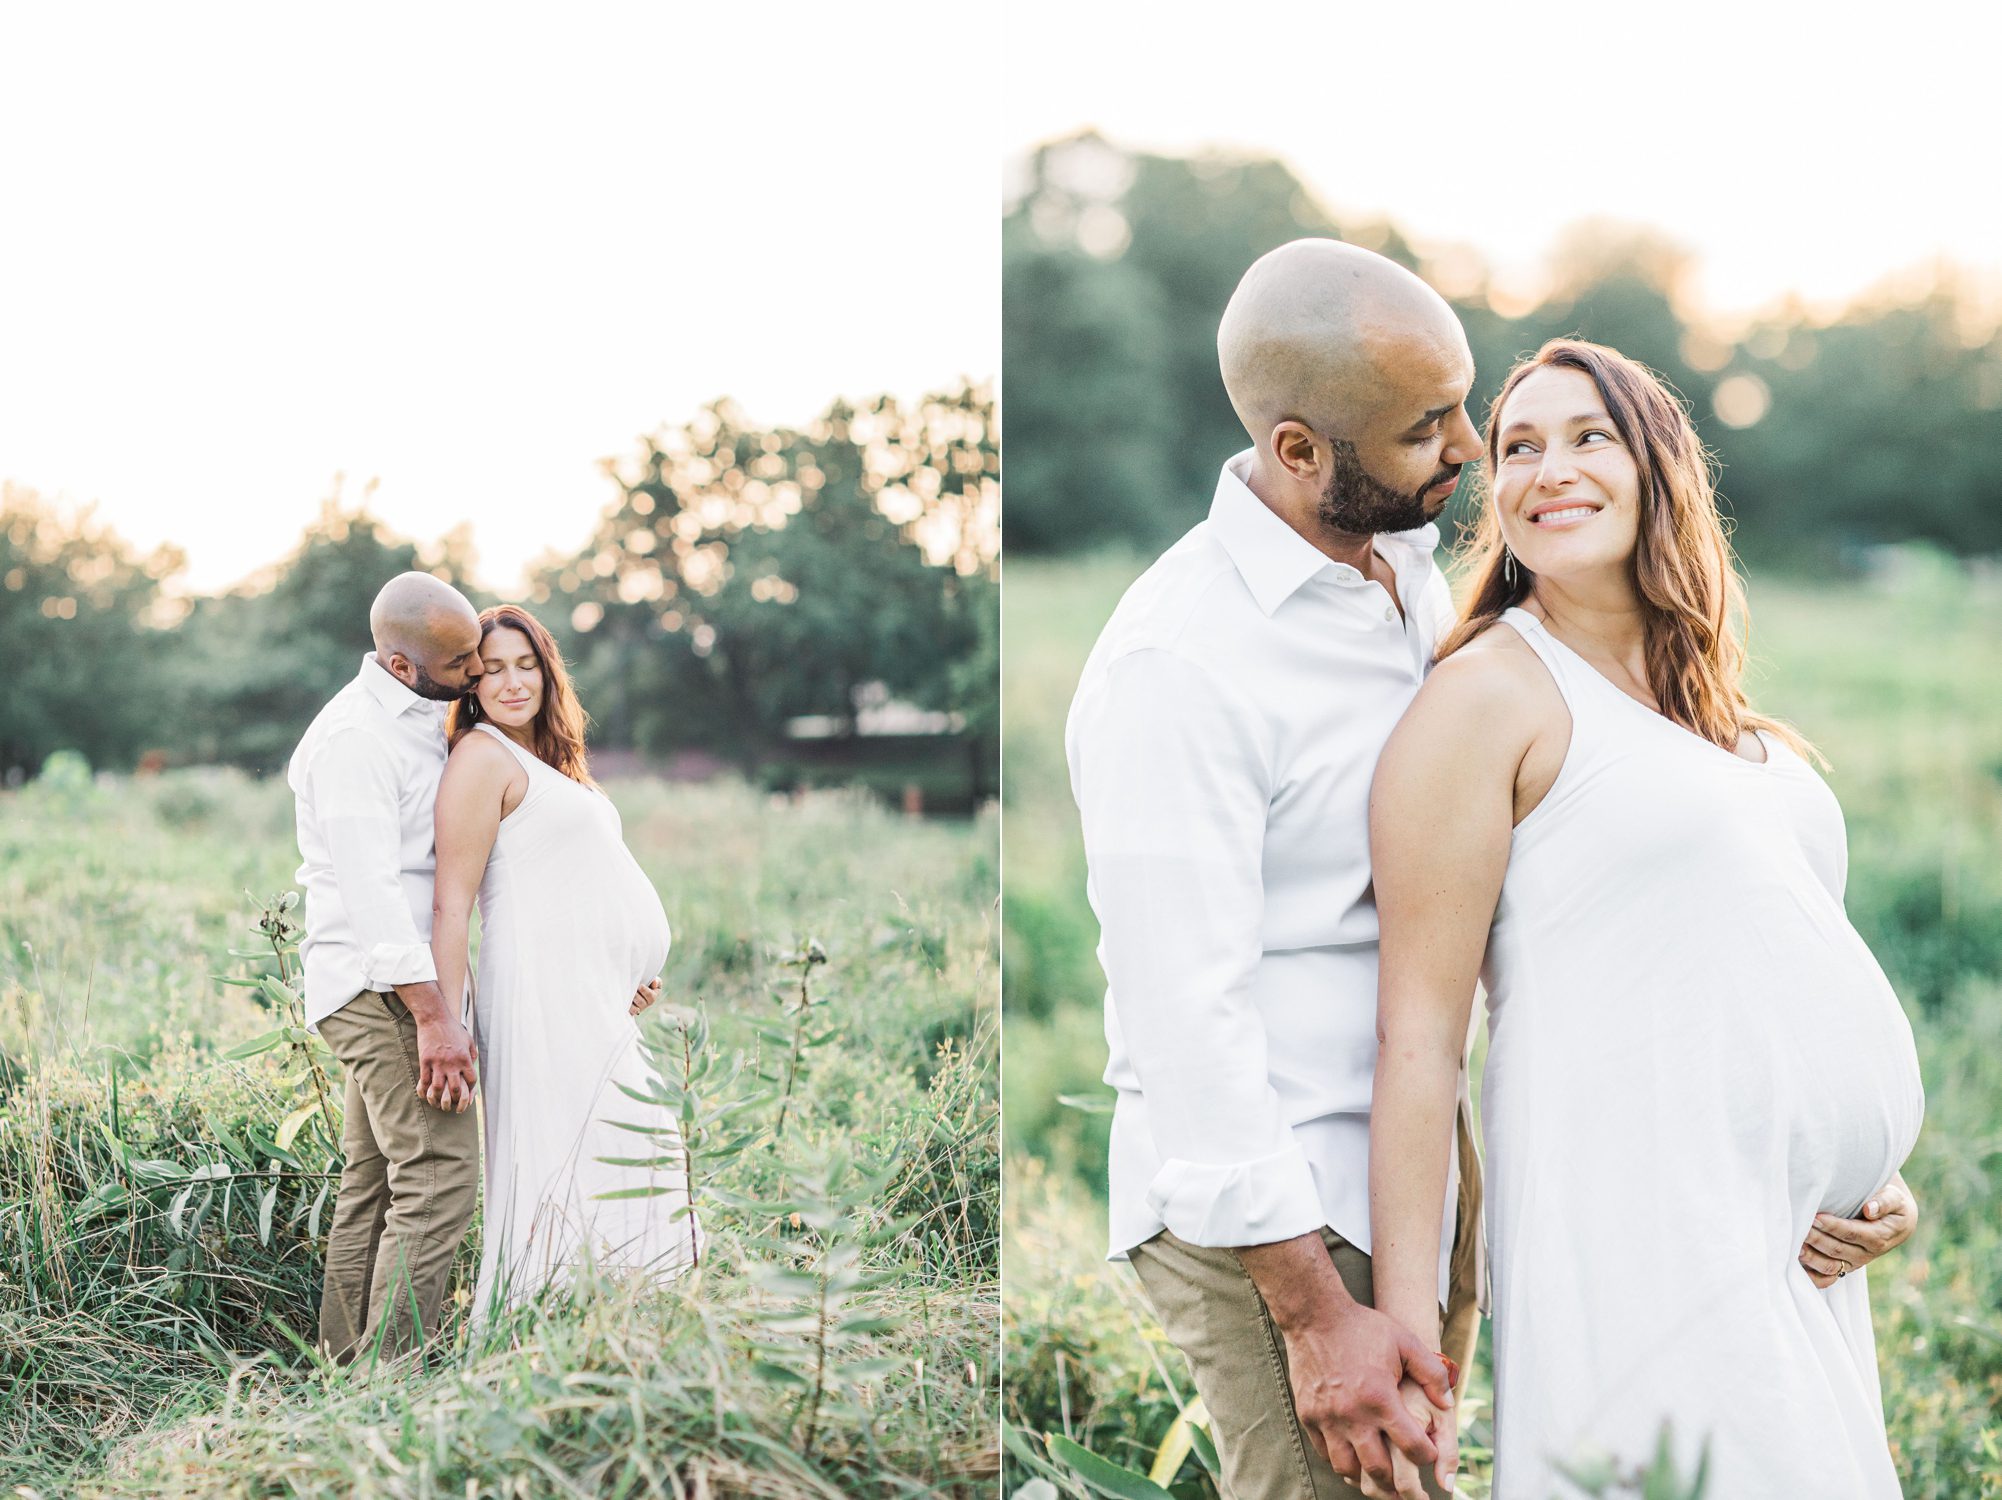 Mom and Dad embracing during maternity session by Washington DC Maternity photographer, LRG Portraits.